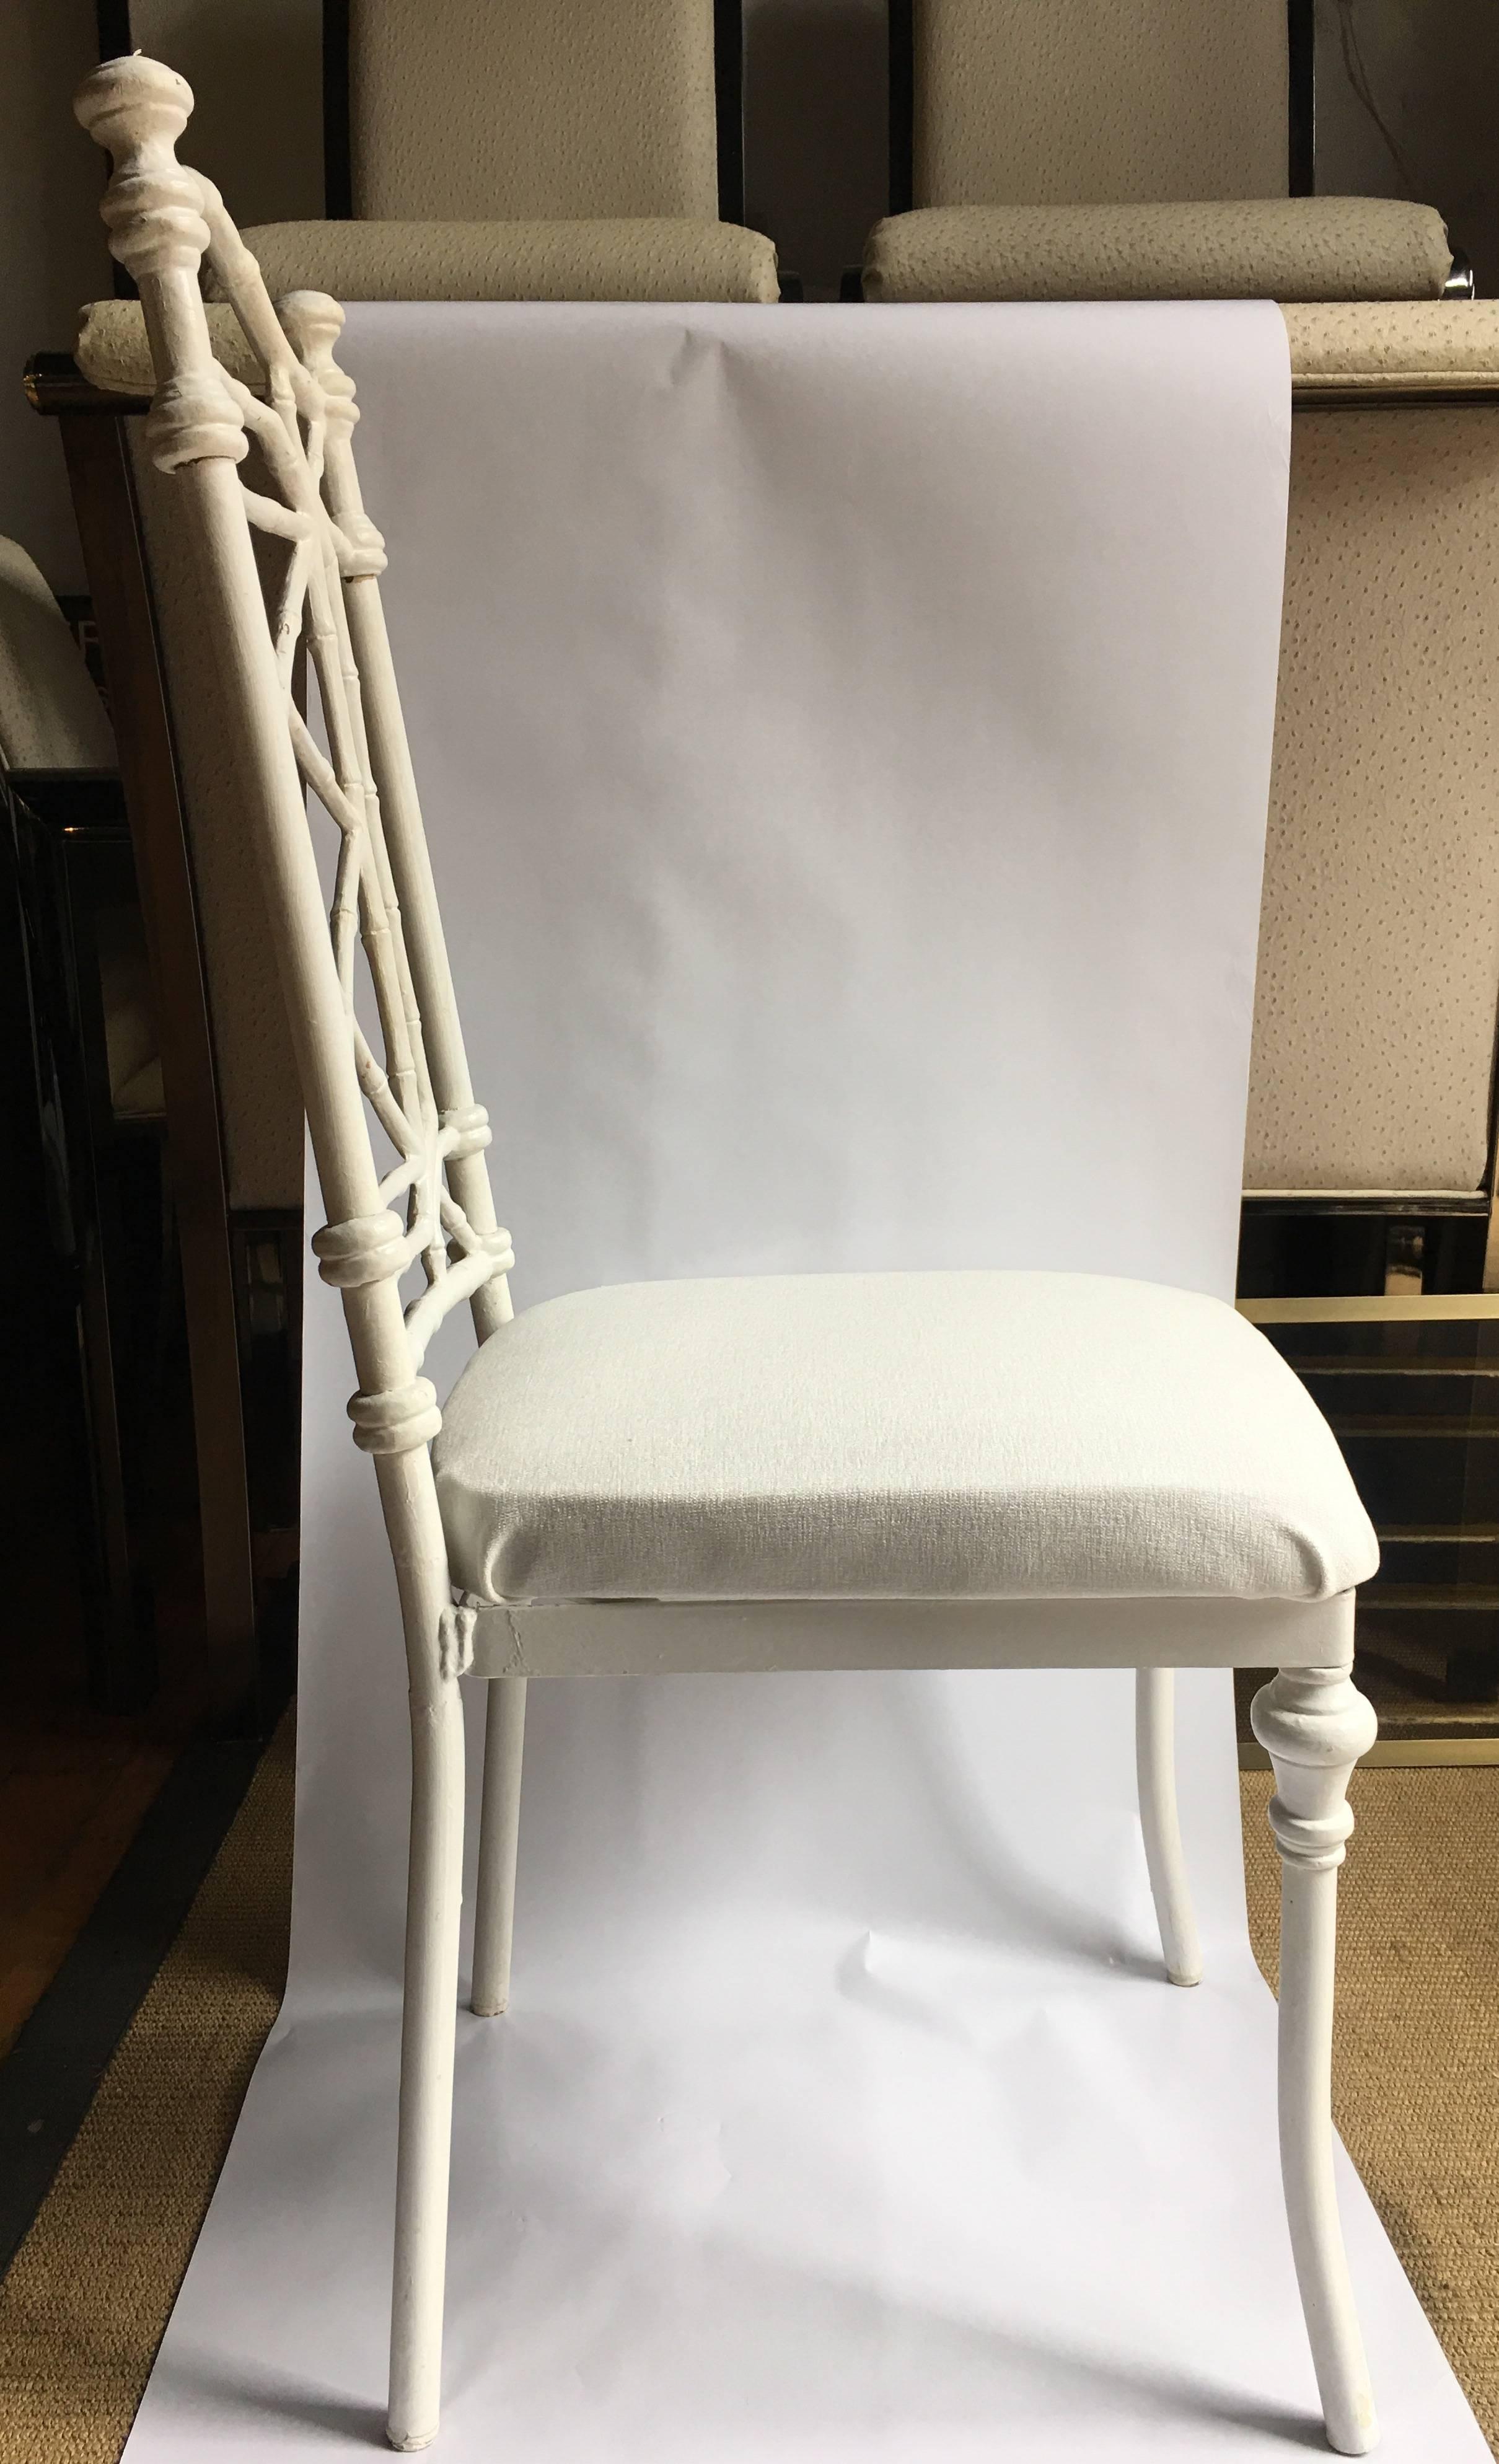 Set of six Hollywood Regency or chinoiserie style faux bamboo dining chairs with cream painted metal frames.